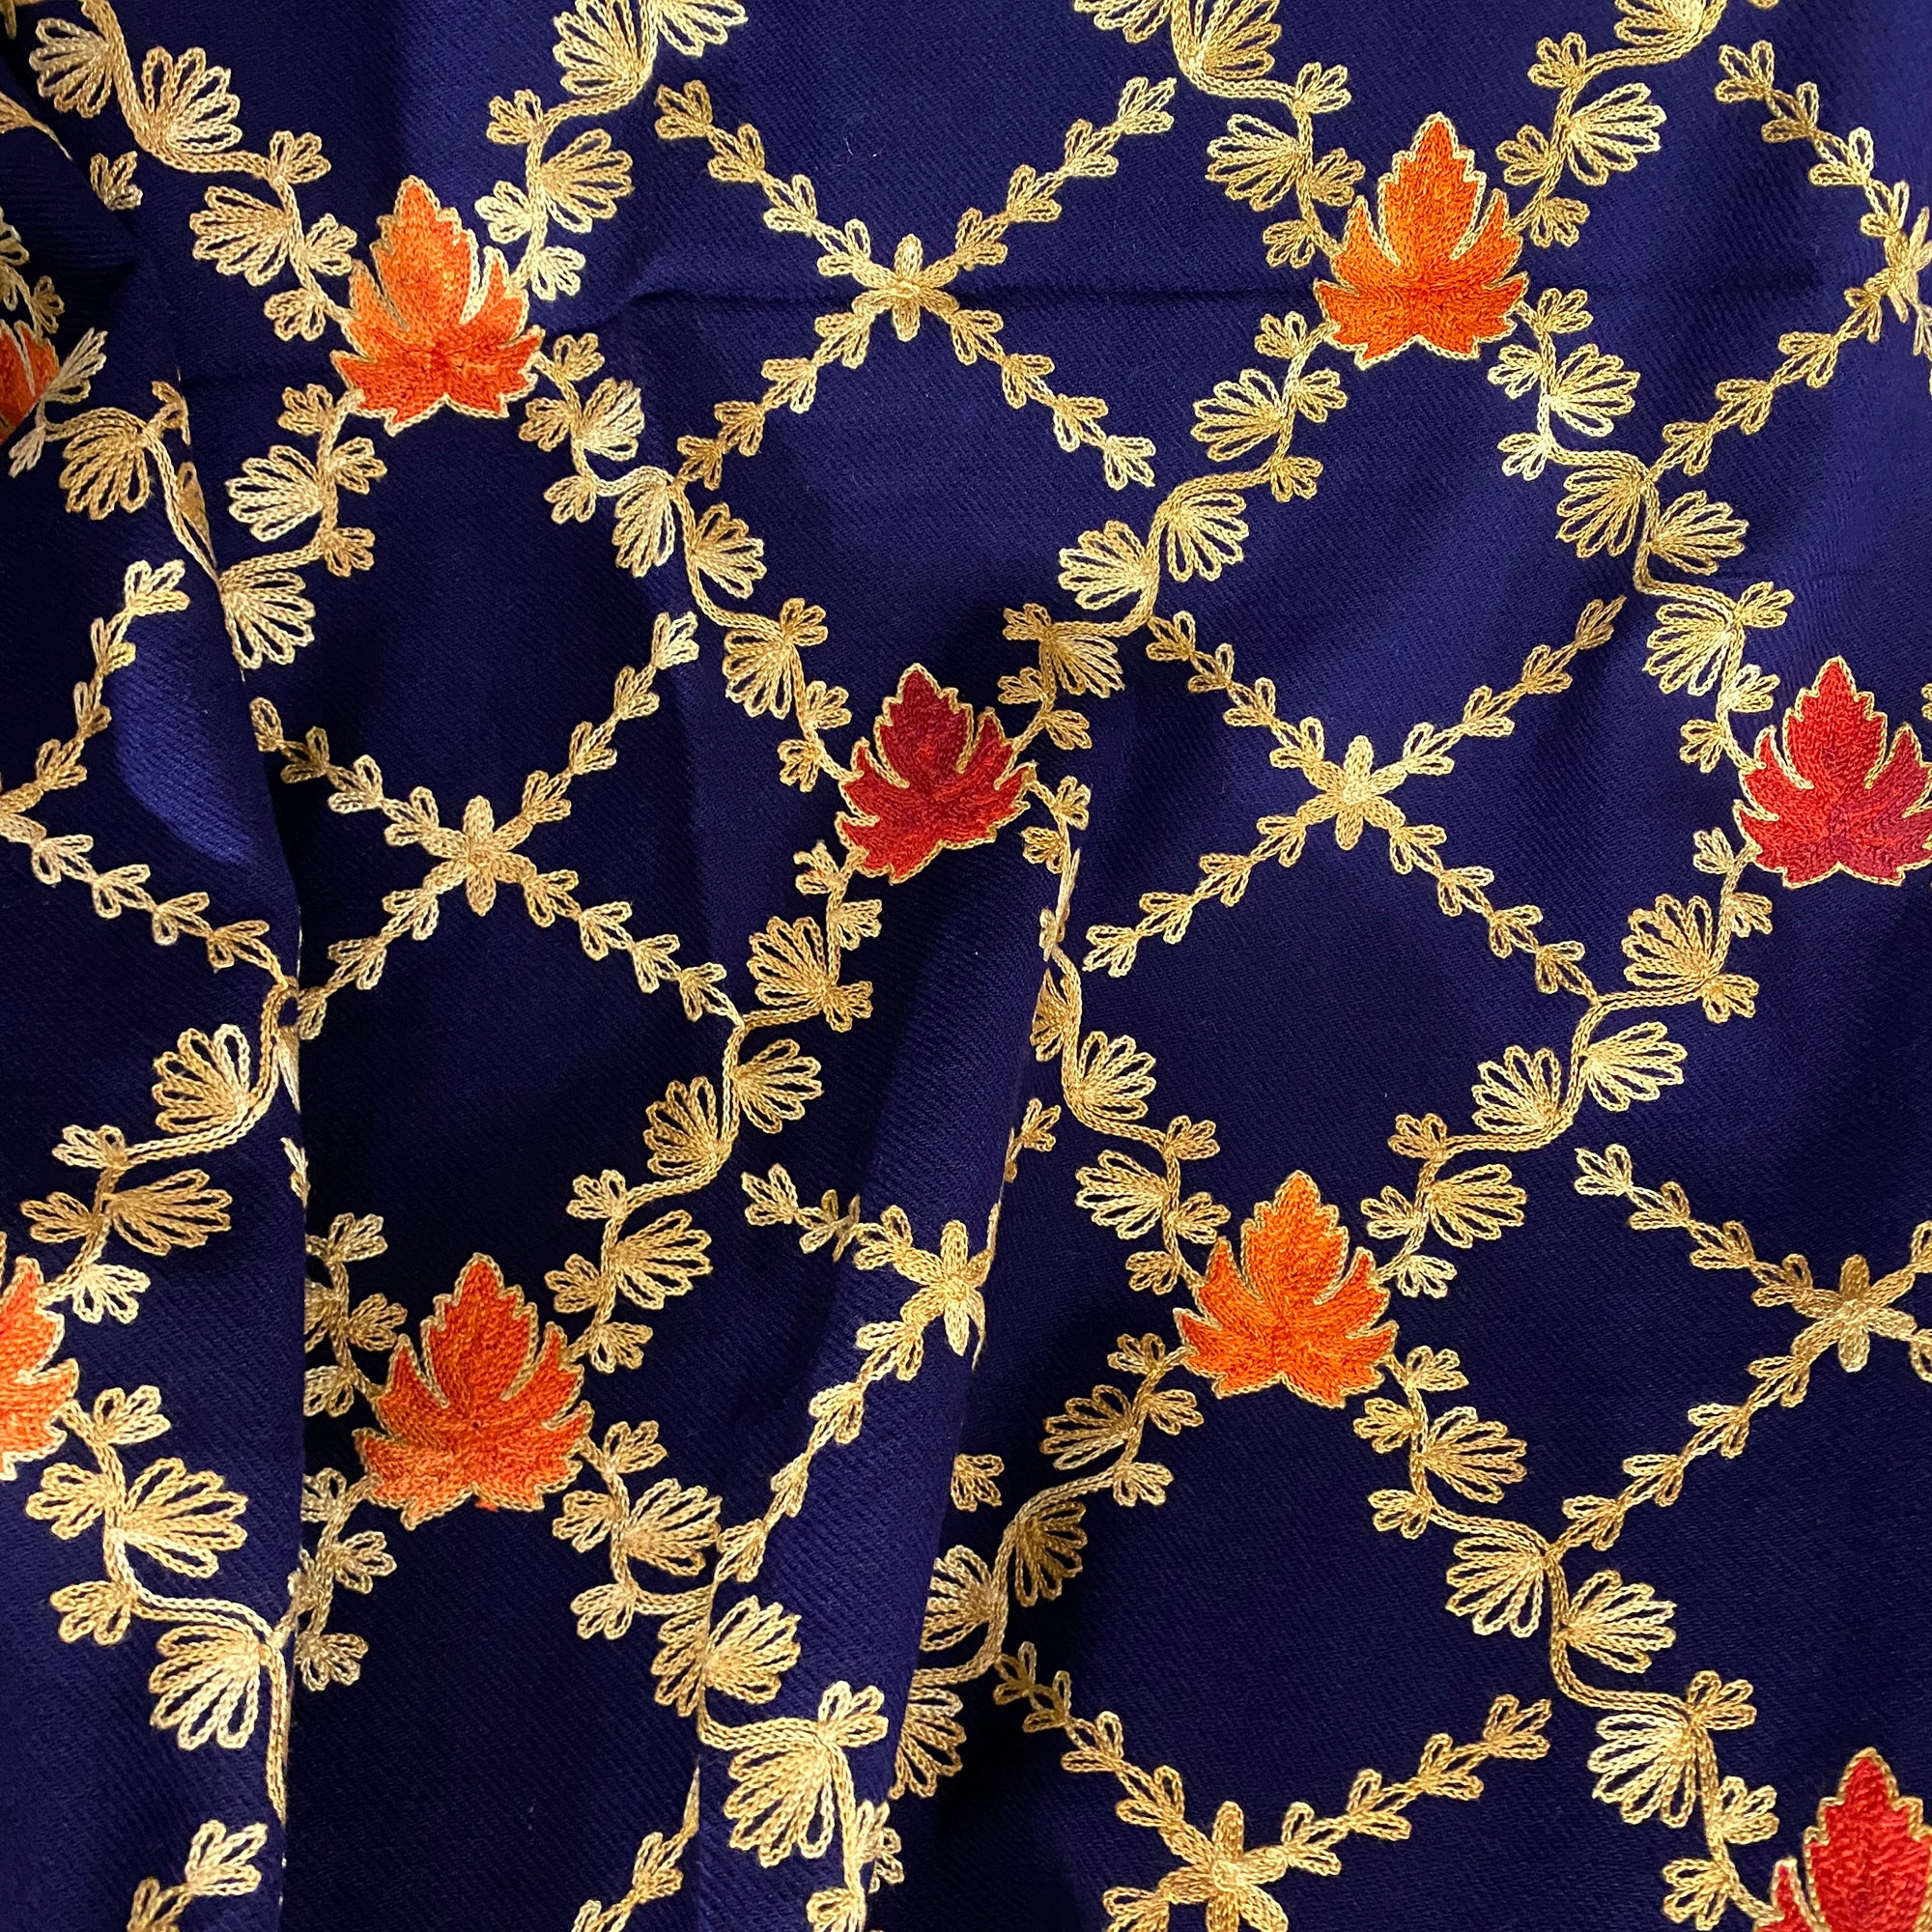 Navy Embroidered Shawls - 2 Styles - Vintage India NYC